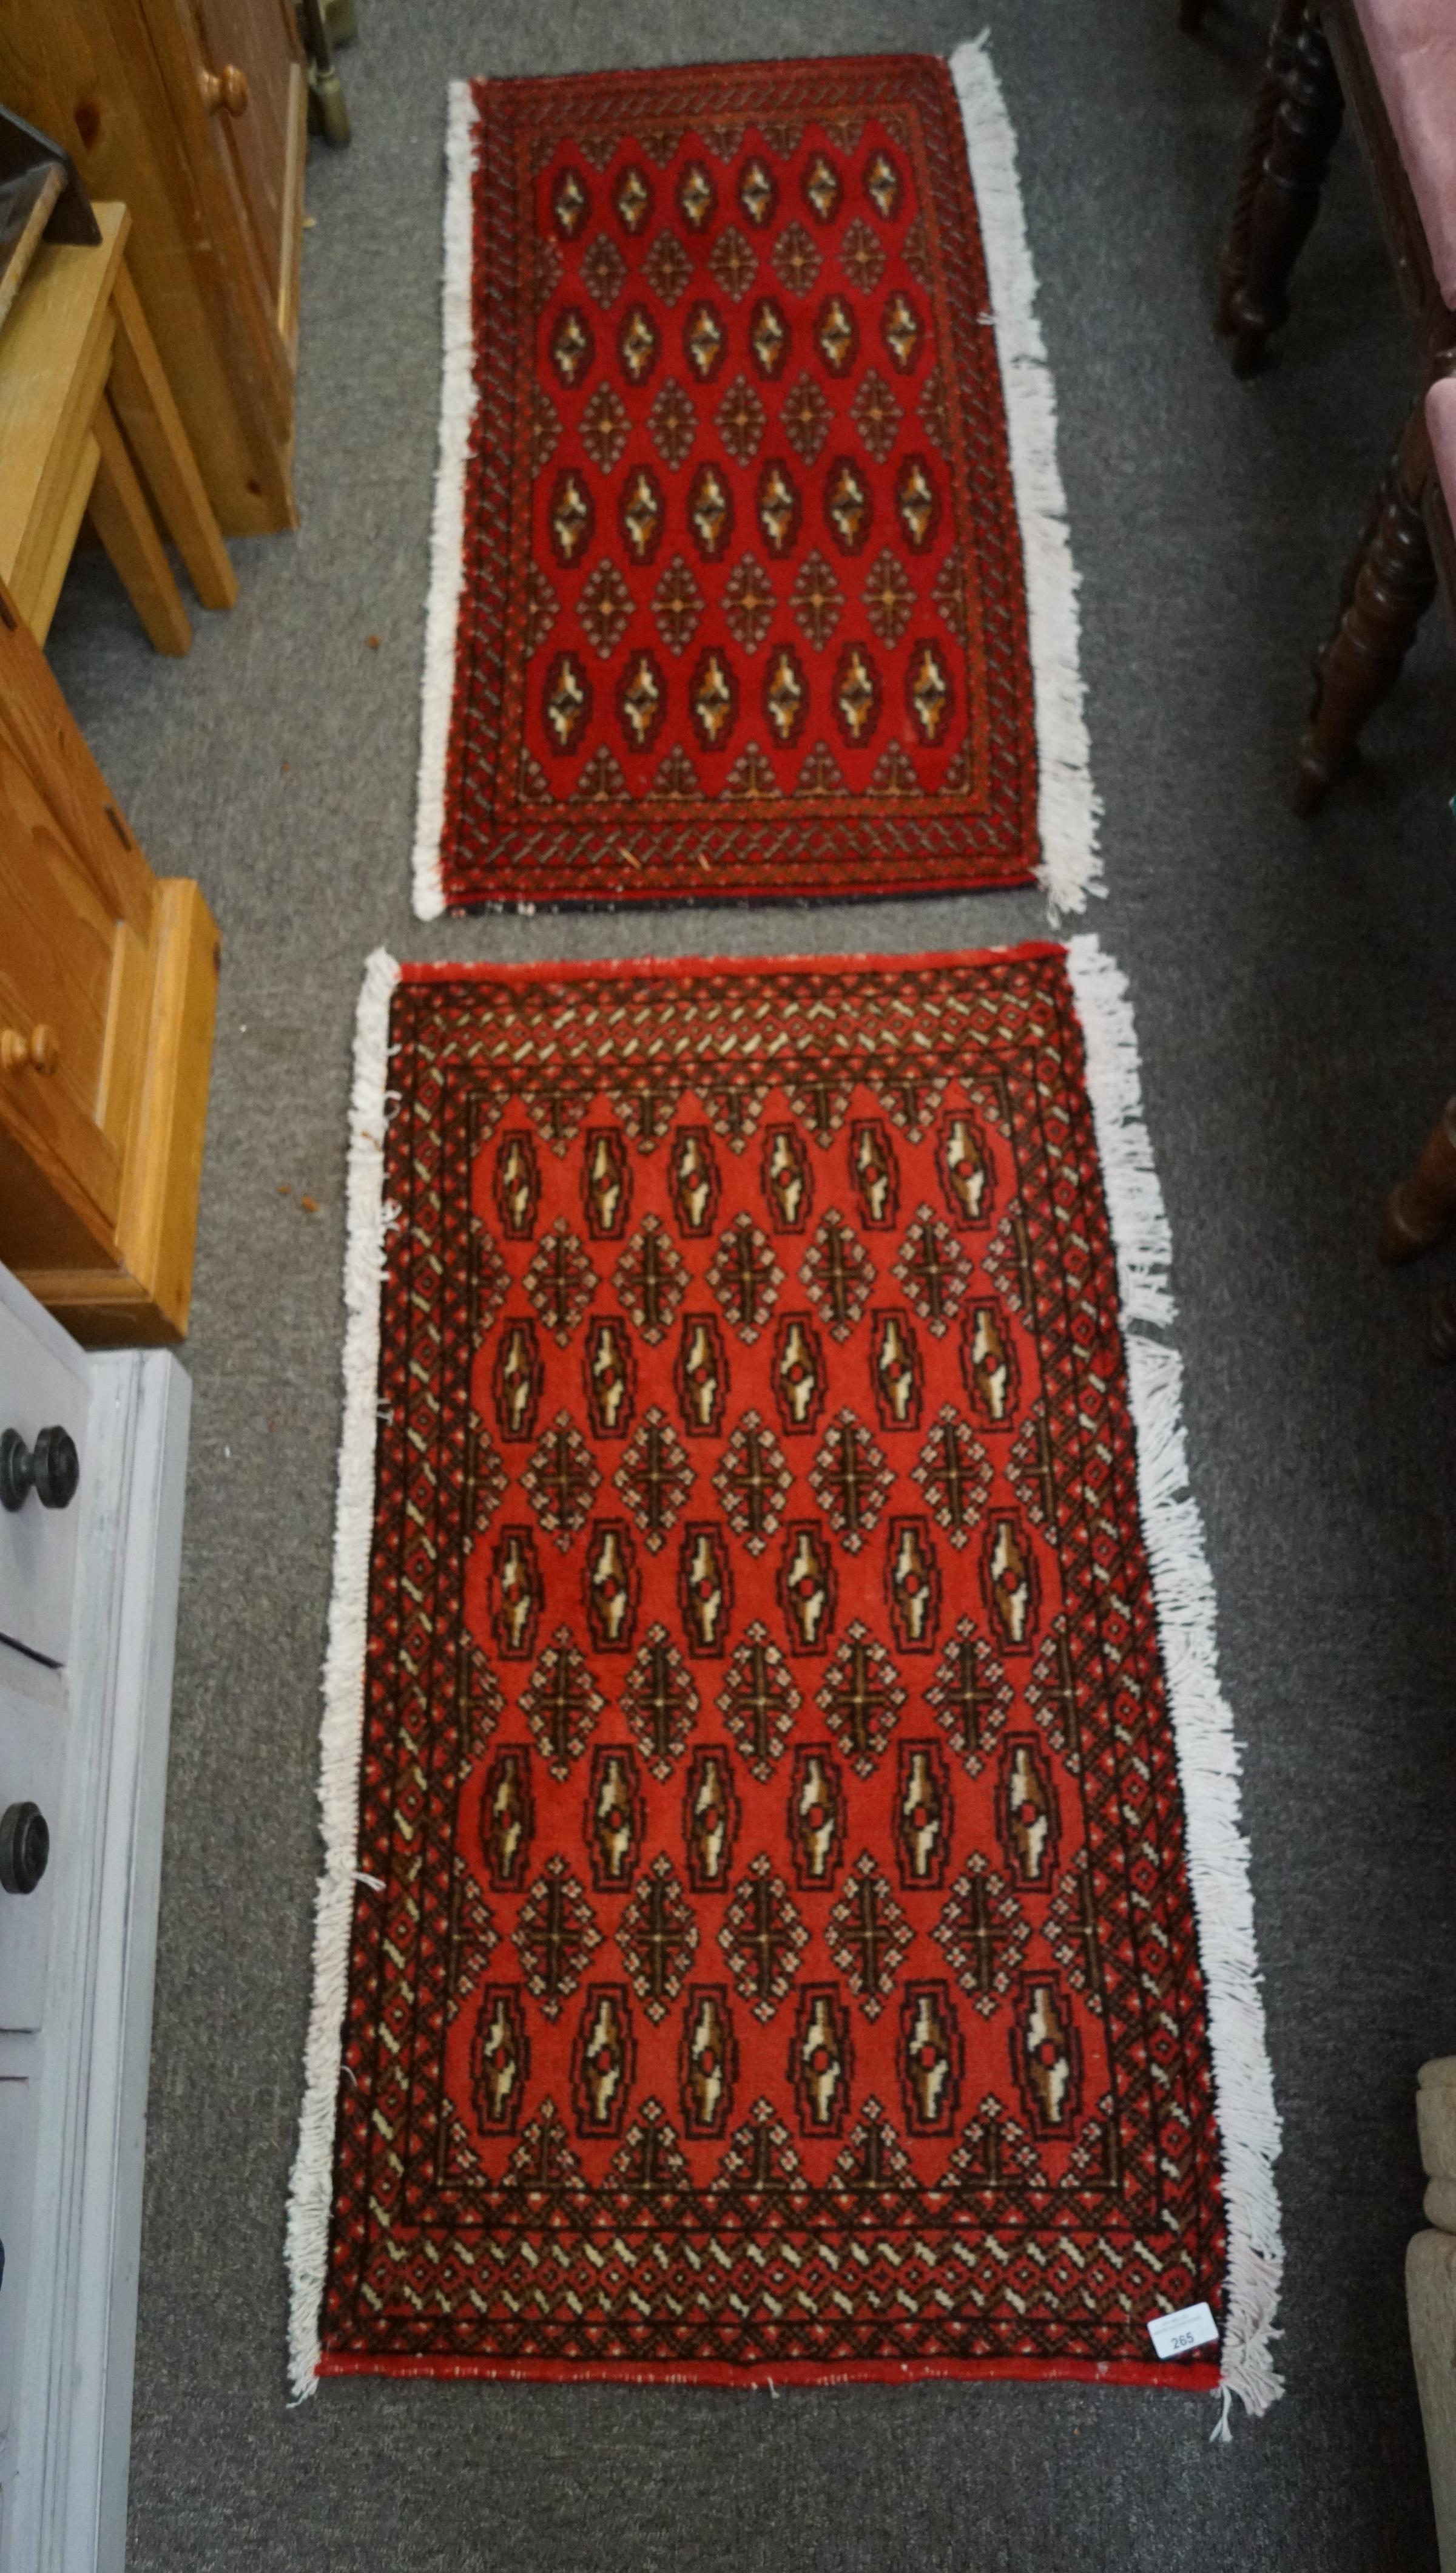 Two small Turkaman rugs with beige and black patterns on a red ground.